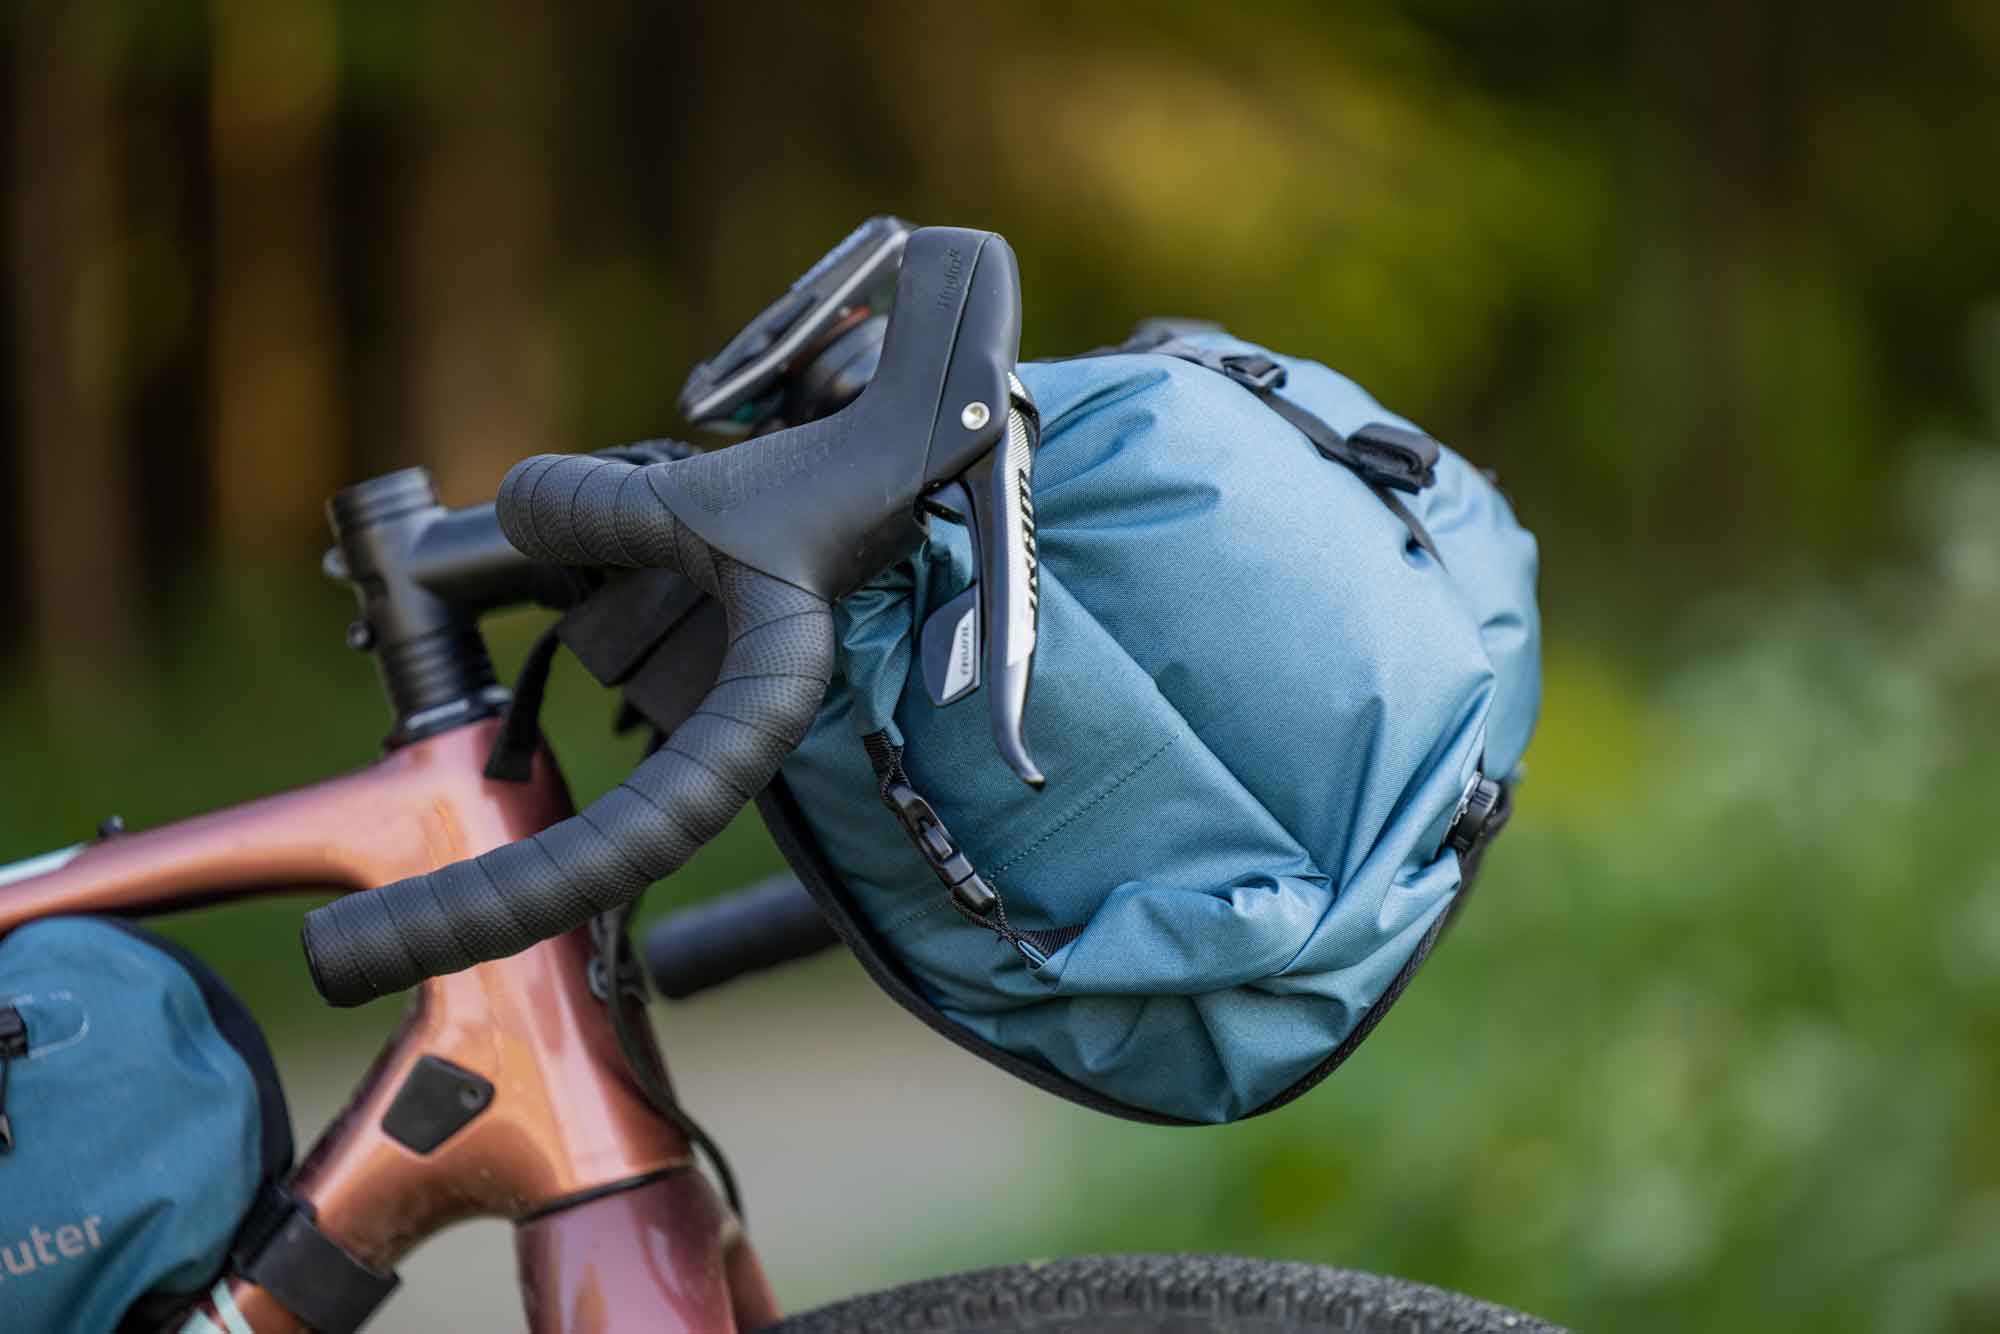 Unfortunately, it usually only looks this nice and tidy at the beginning of the tour. In the course of the ride, the handlebar bag tends to twist downwards despite the additional belt.